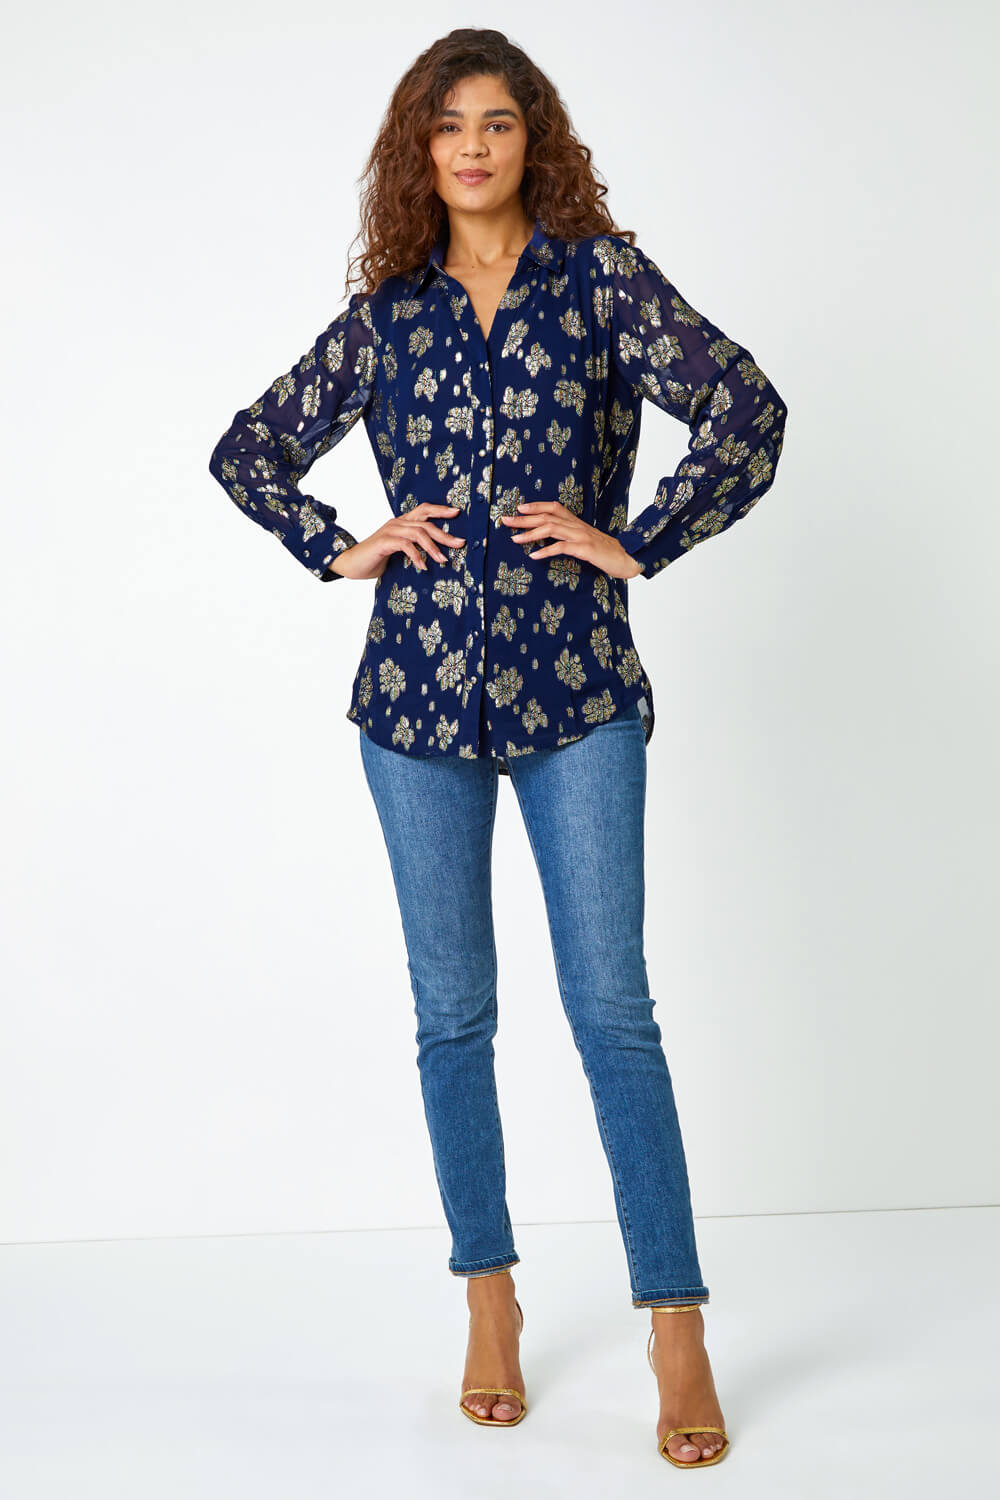 Midnight Blue Metallic Floral Print Blouse, Image 3 of 5